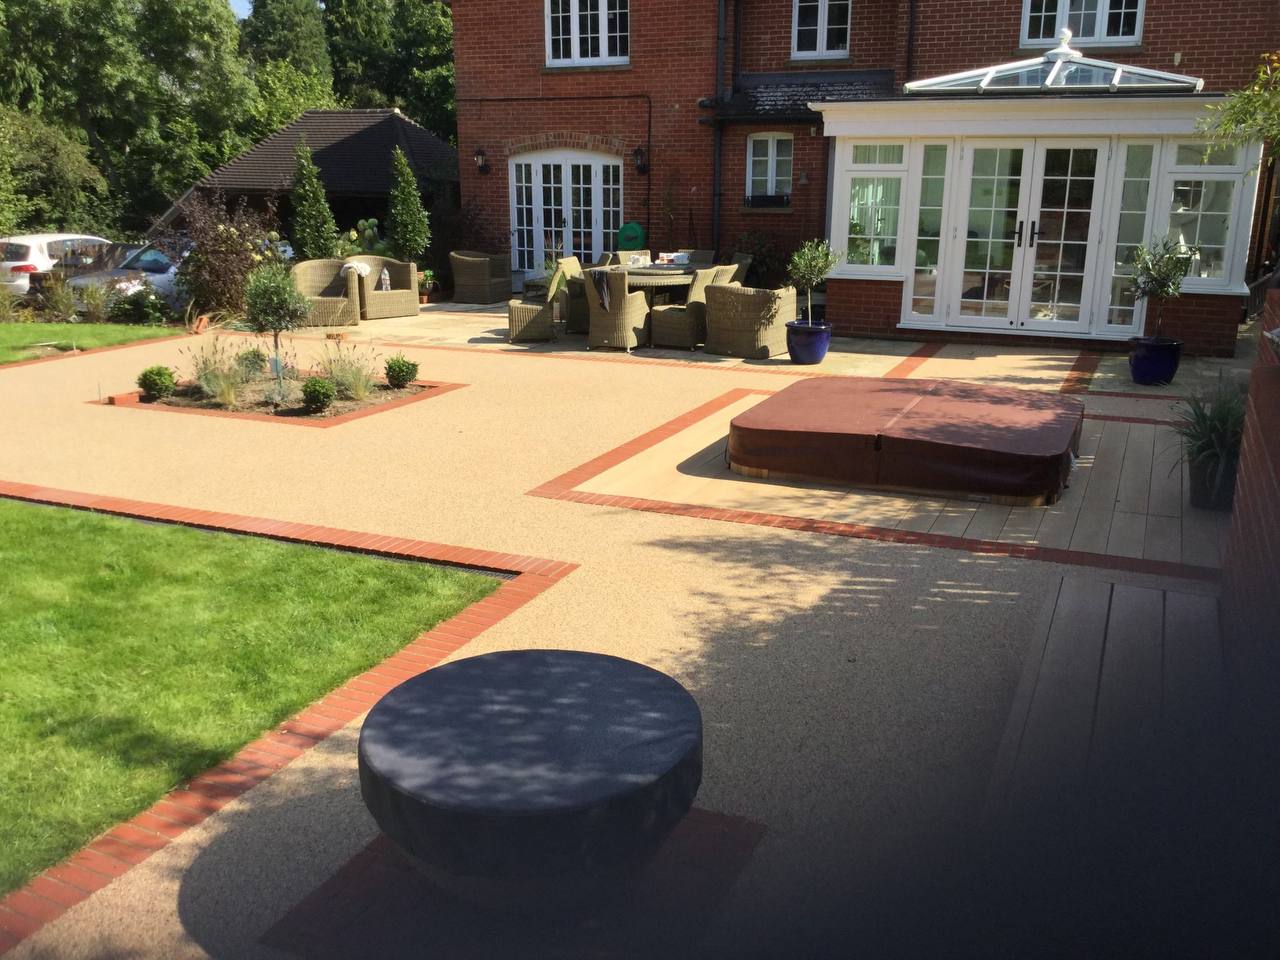 This is a photo of a Resin bound patio carried out in Swansea. All works done by Resin Driveways Swansea